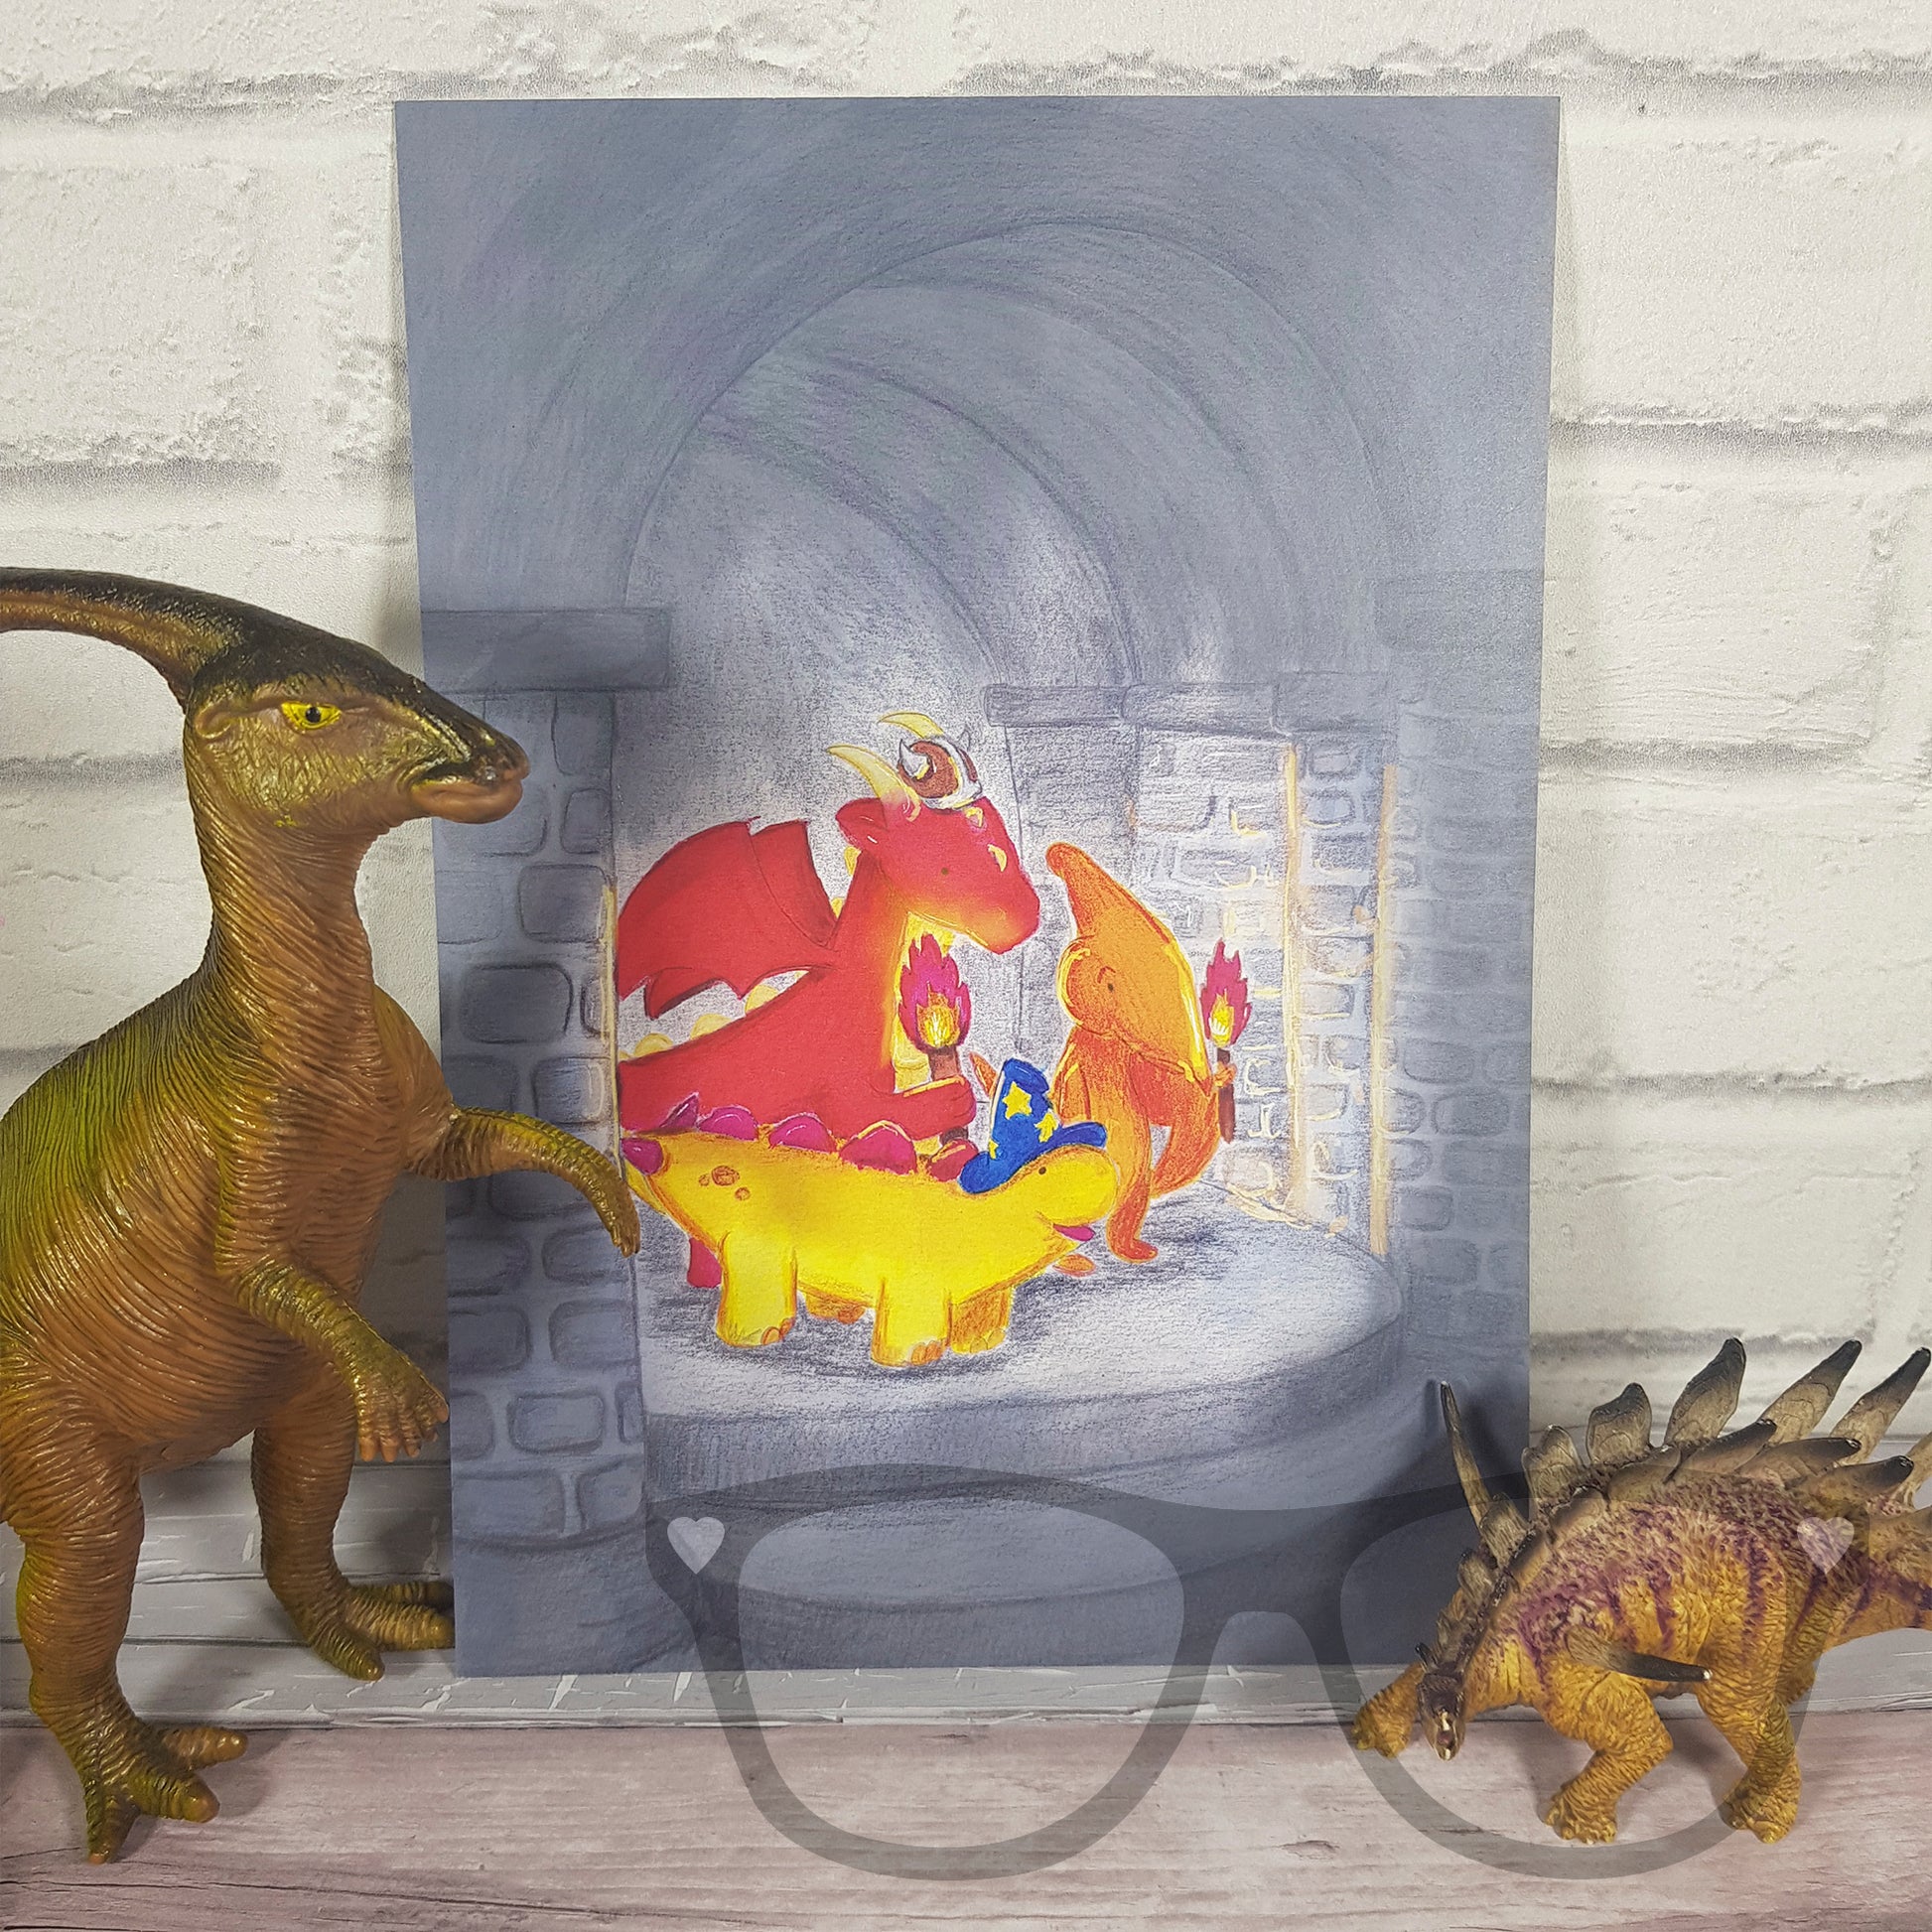 A4 Print "Lets go find the mystical donut" - Mini Geek Boutique. Derek and Irene the dinosaurs are standing next to the print which is leaning up against a white brick wall.